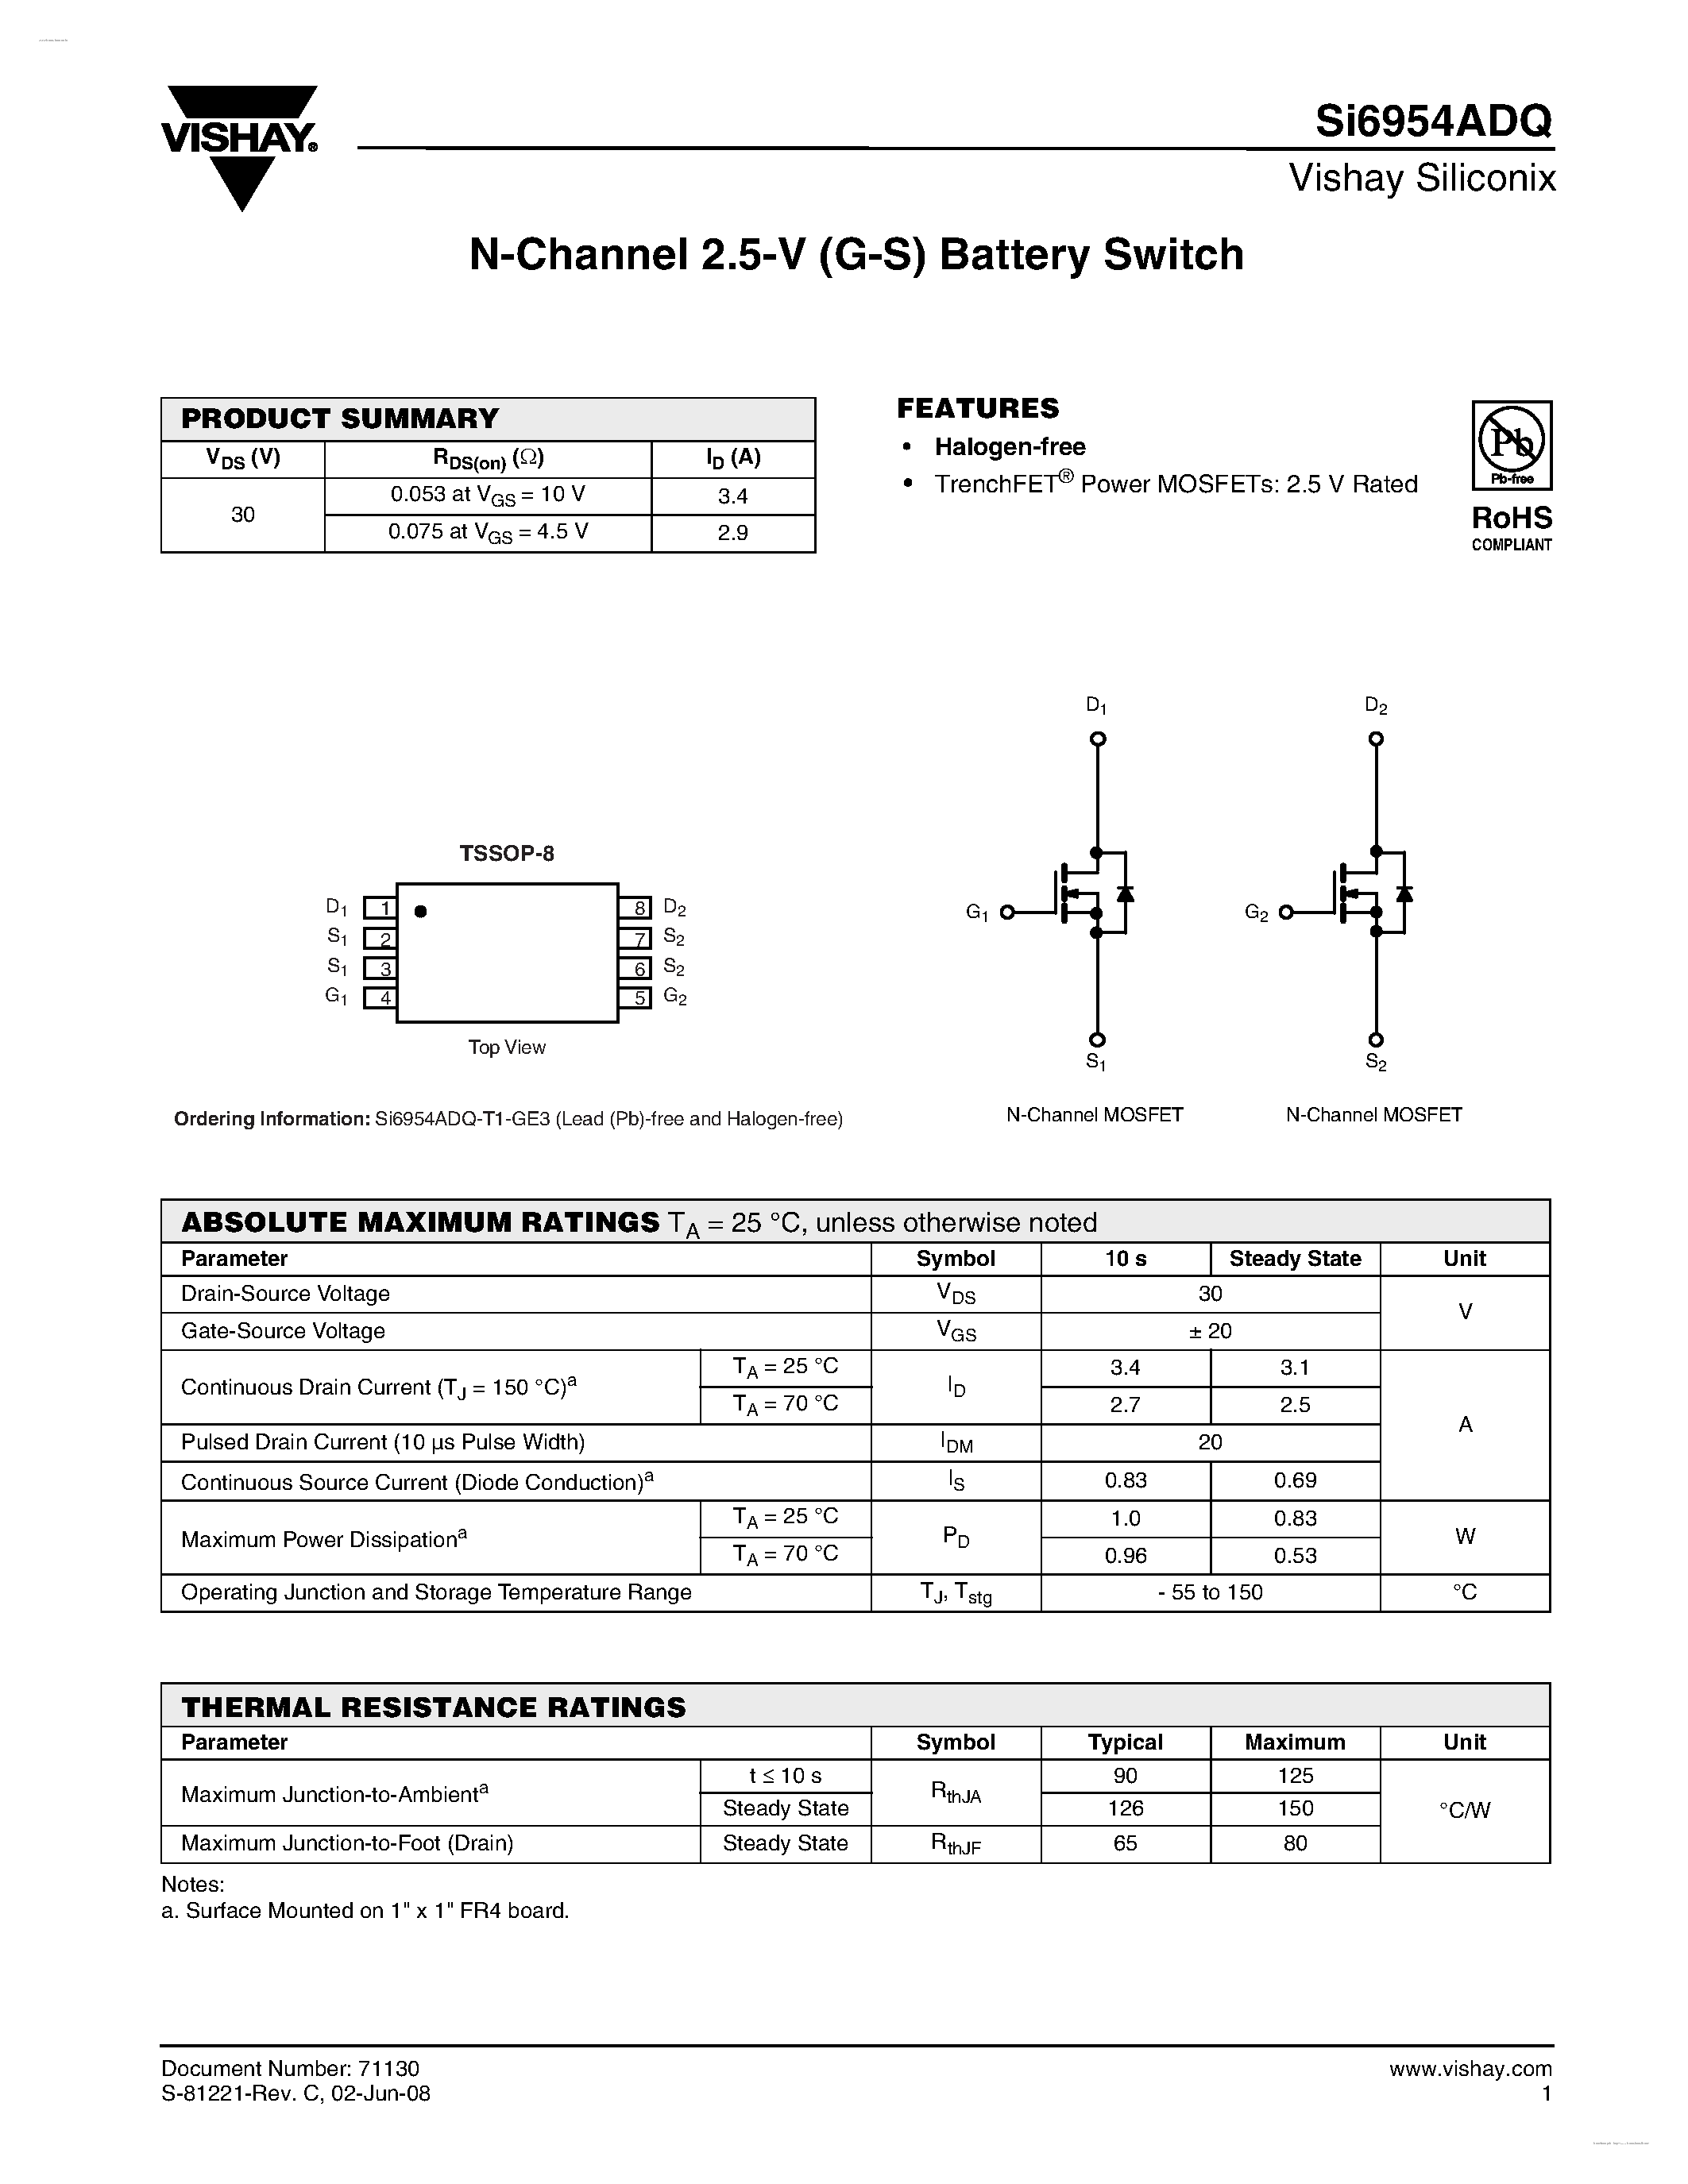 Datasheet SI6954ADQ - N-Channel 2.5-V (G-S) Battery Switch page 1